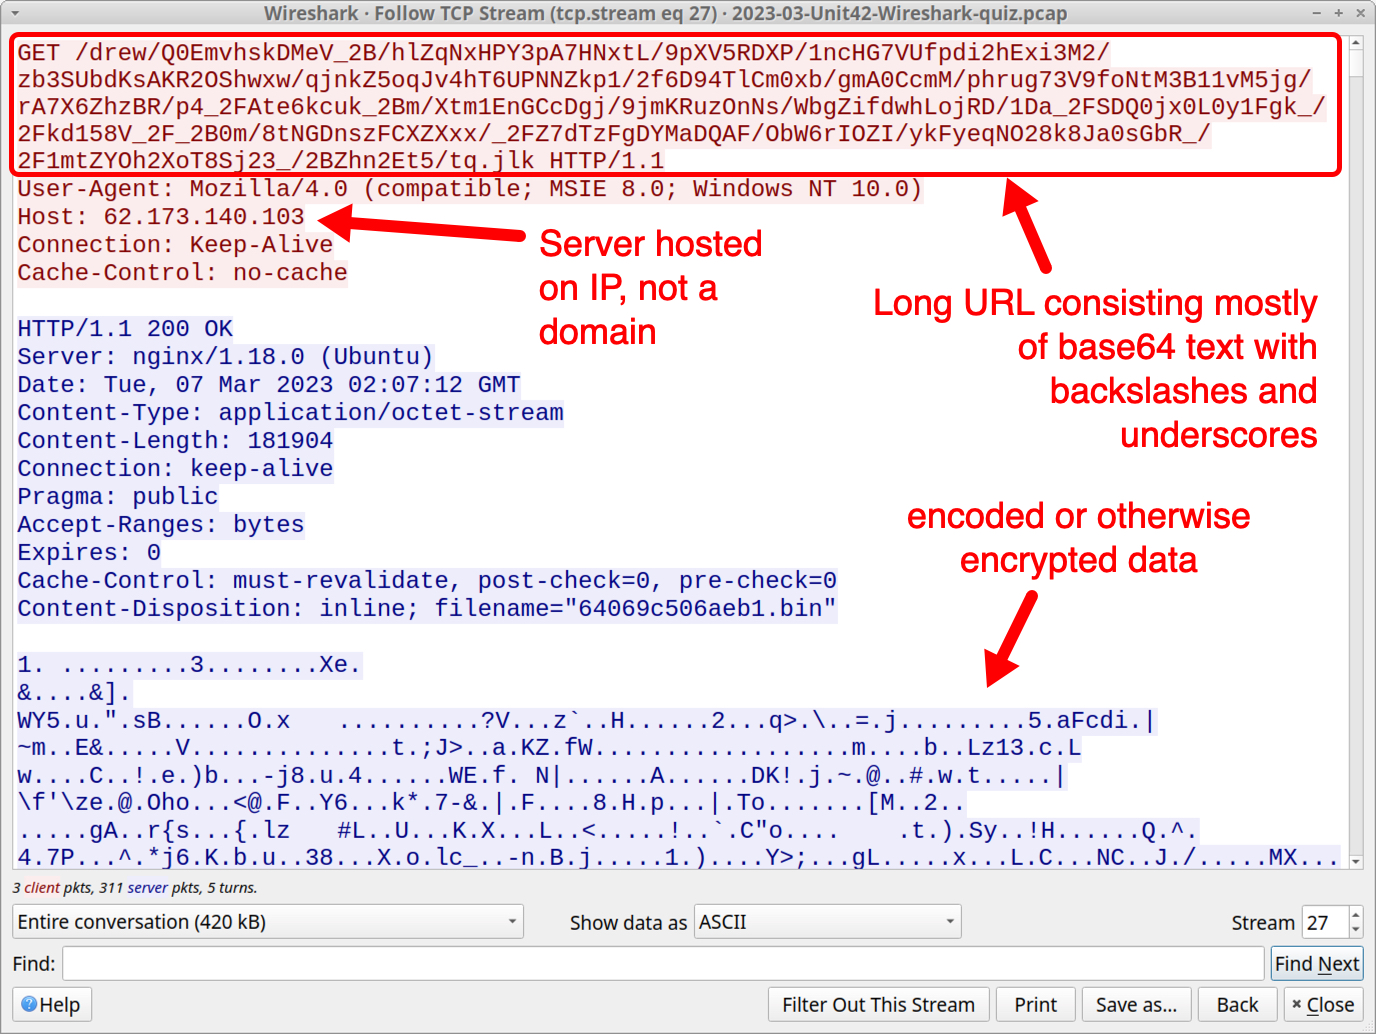 Image 13 is a screenshot of Wireshark showing the initial traffic. Highlight in red and with an arrow is the long URL of base64 text. Highlighted with an arrow is the server hosted on IP, under “Host.” Highlighted with an arrow at the bottom of the window is the encoded data. 